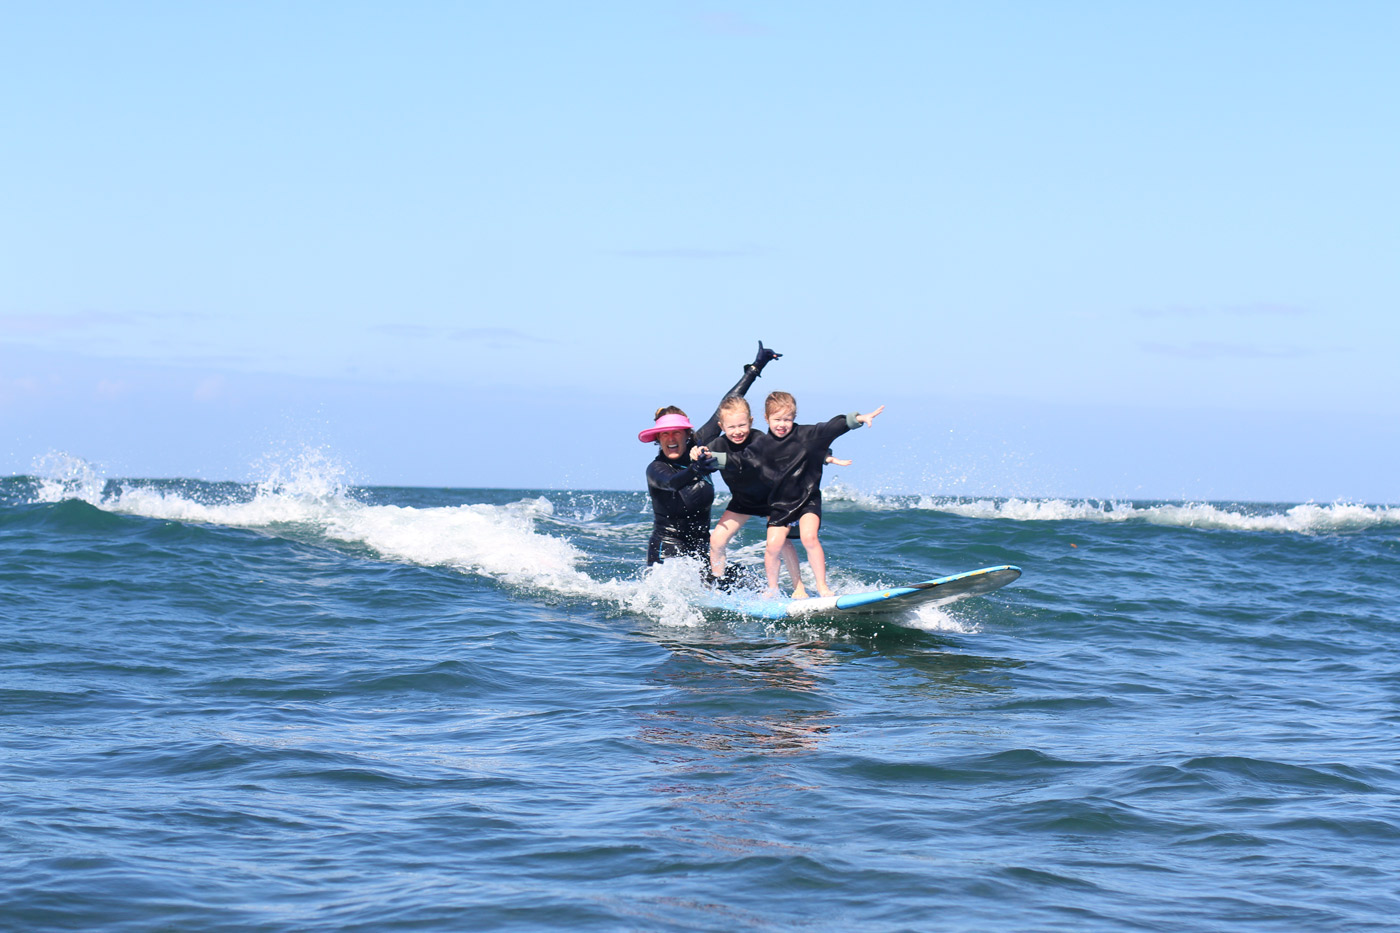 Learning to surf gives children confidence